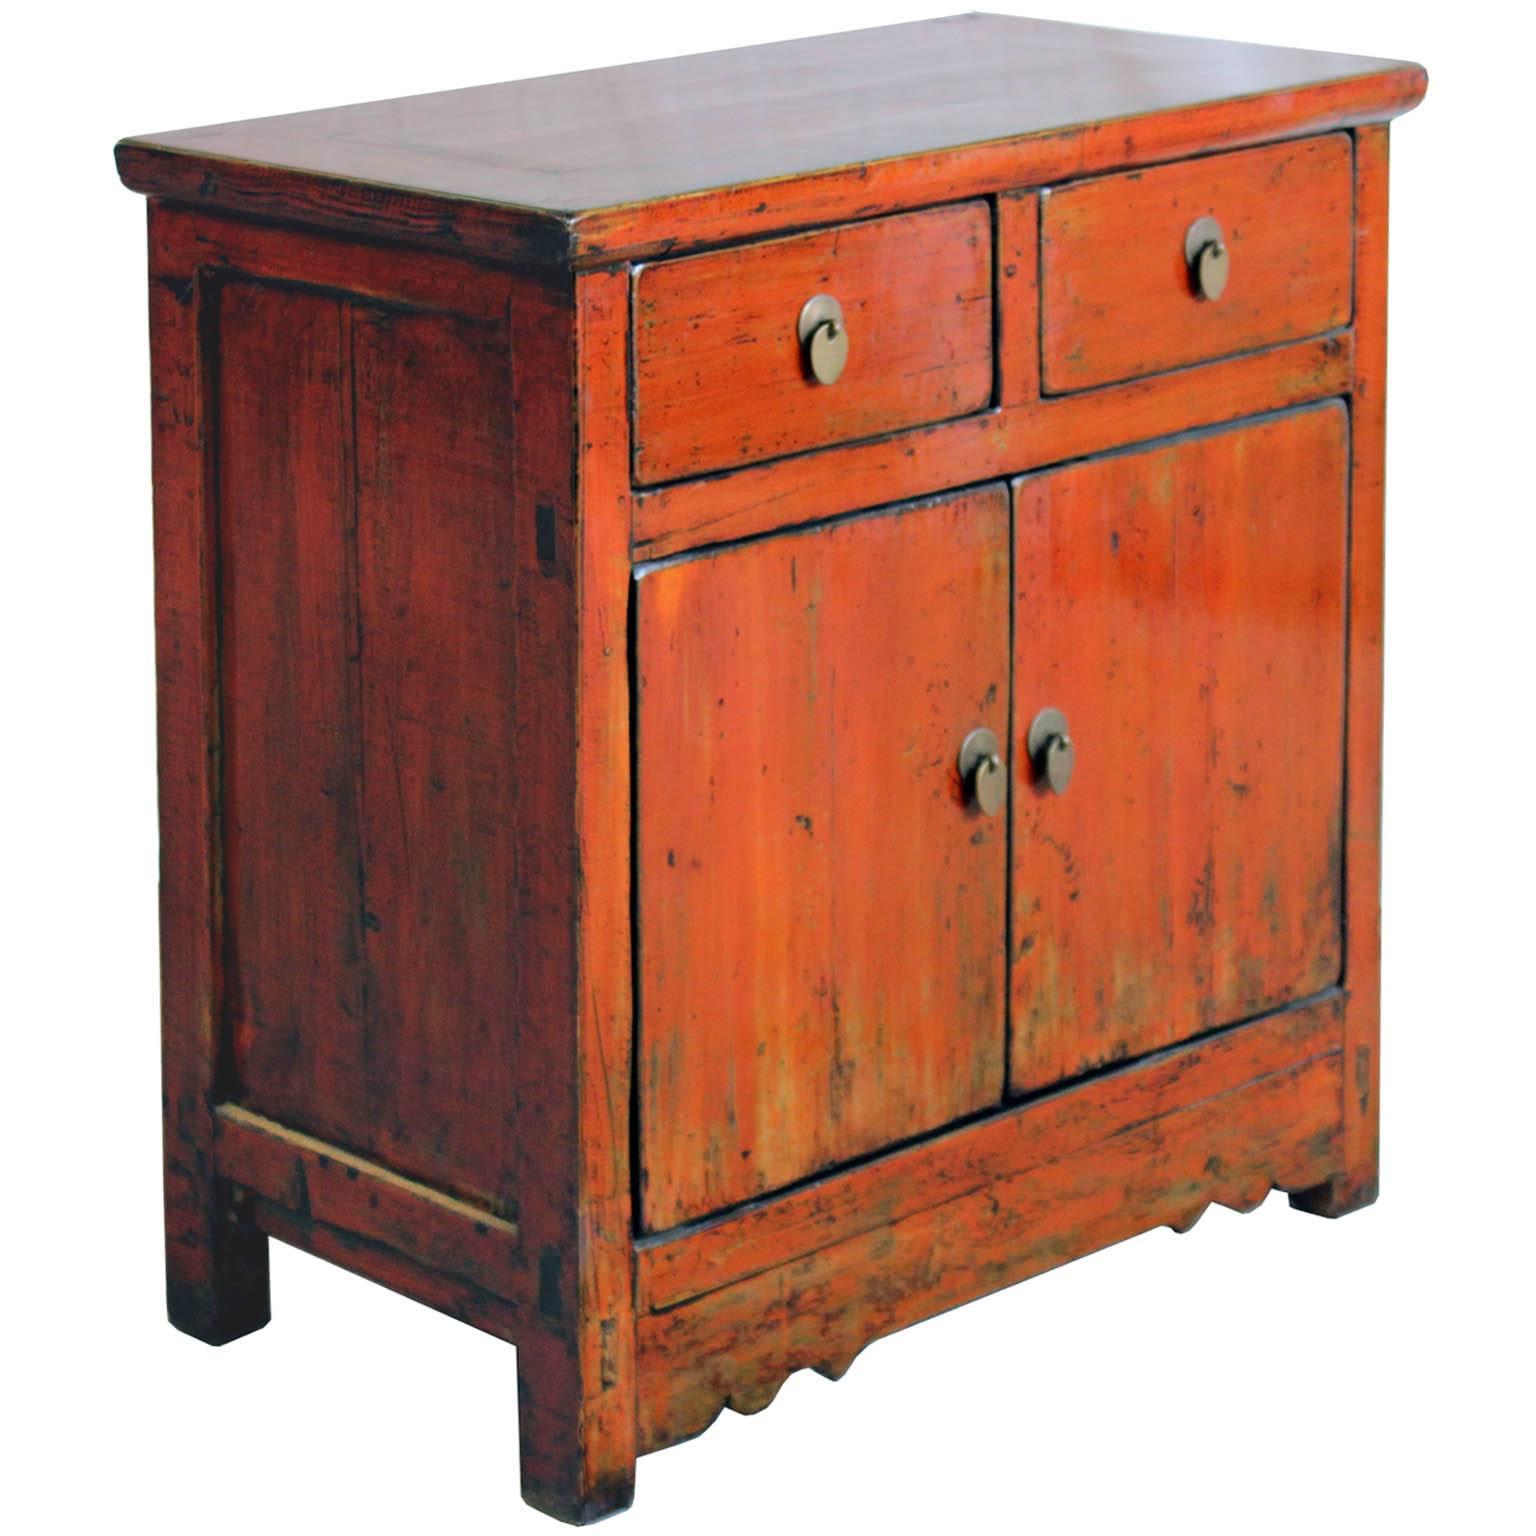 Two-drawer orange side chest with exposed wood edges and carved bottom skirt . New interior shelf and hardware. Gansu, China, circa 1890s. 